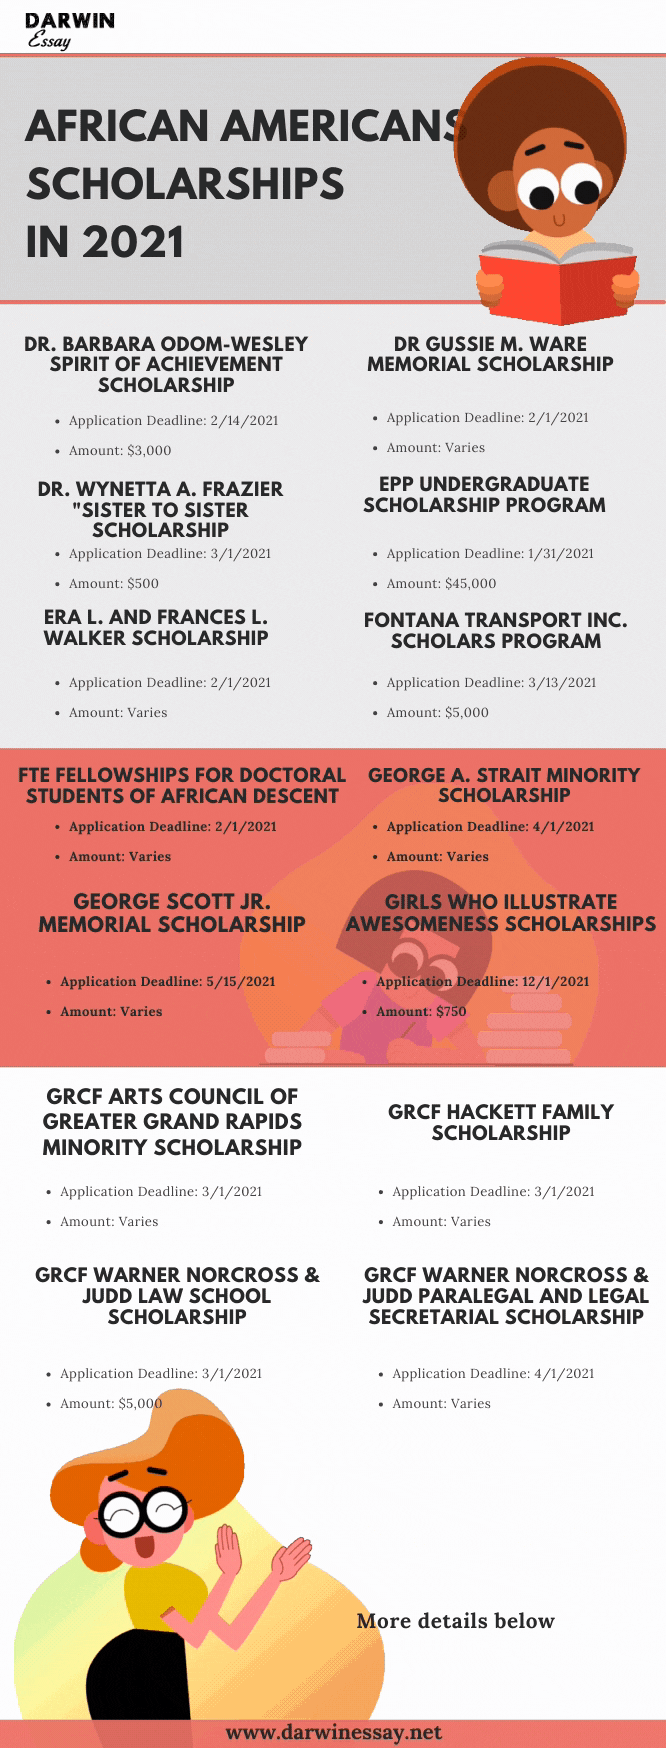 Infographic about African American Scholarships avaliable in 2021.